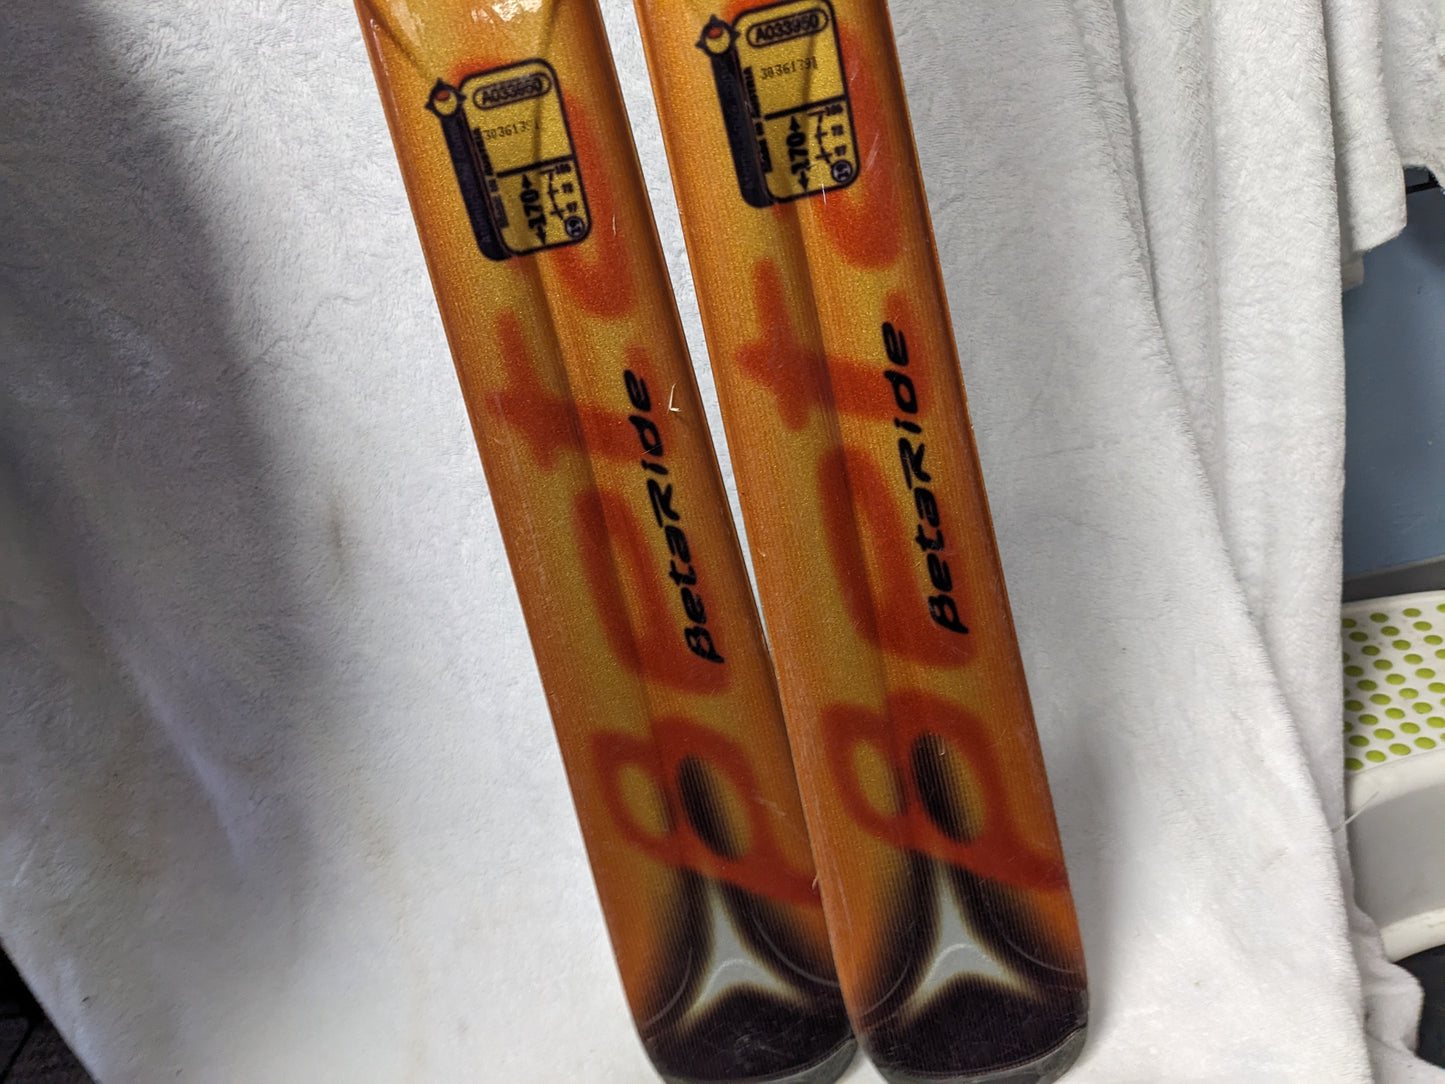 Atomic Beta Ride R9 22 Skis *No Bindings* Size 170 Cm Color Orange Condition Used